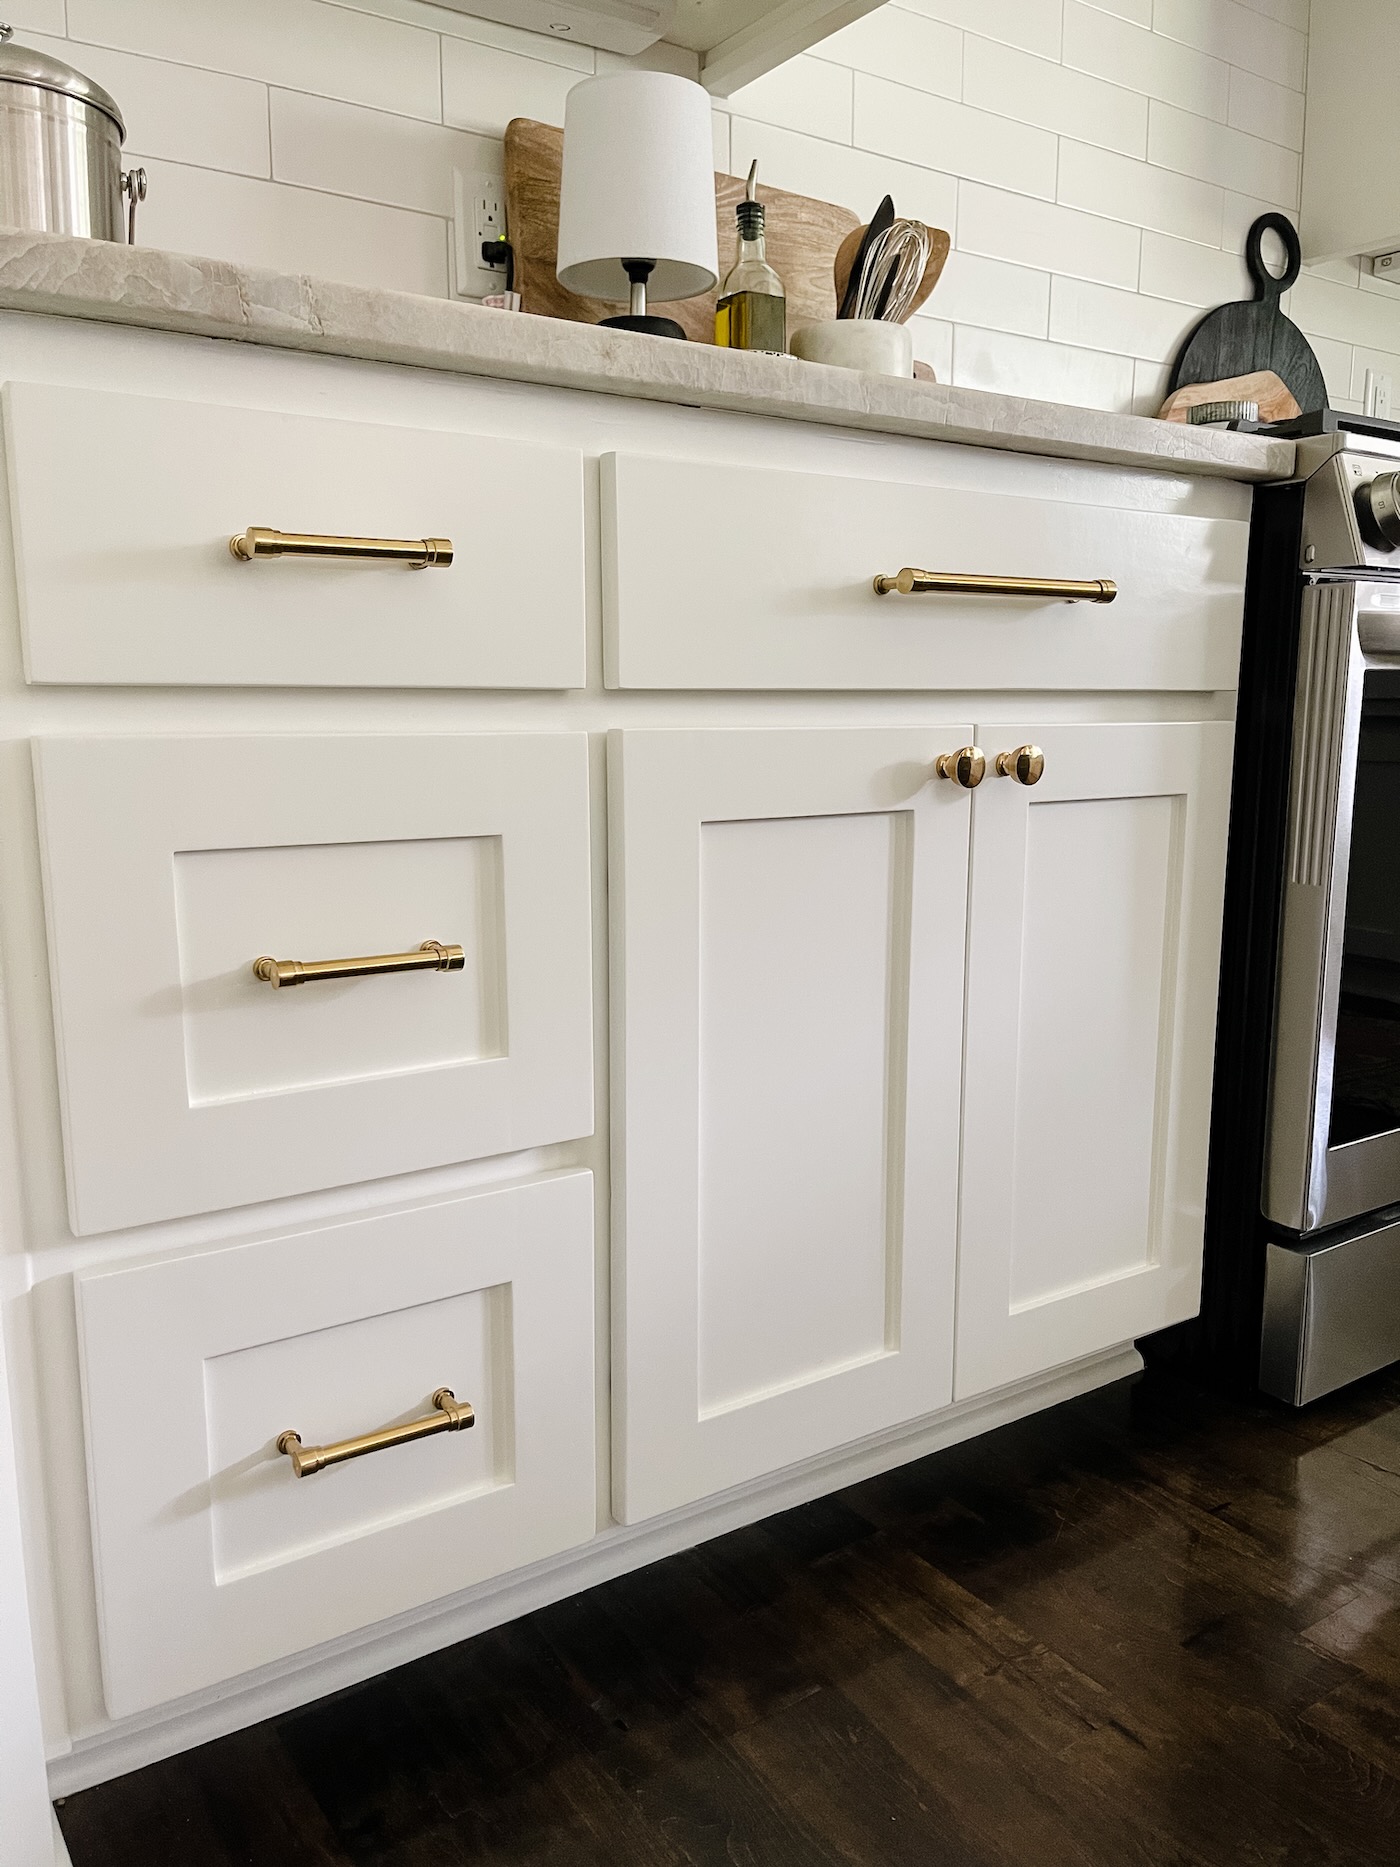 How To Pair Brass Hardware With Warm White Cabinets Life Love Larson